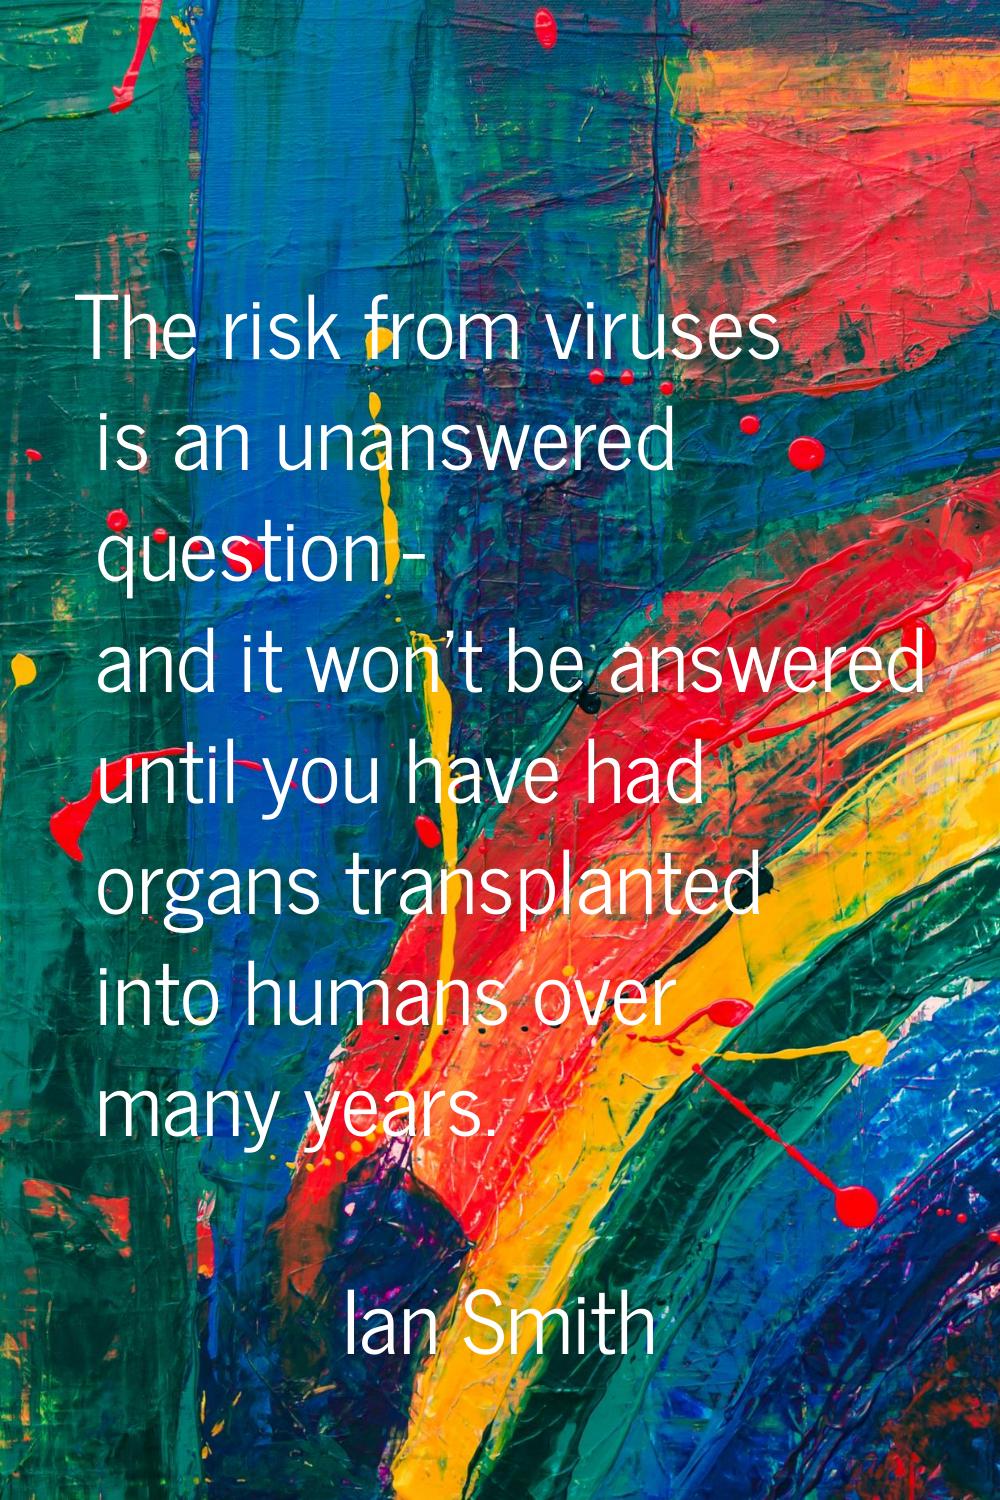 The risk from viruses is an unanswered question - and it won't be answered until you have had organ